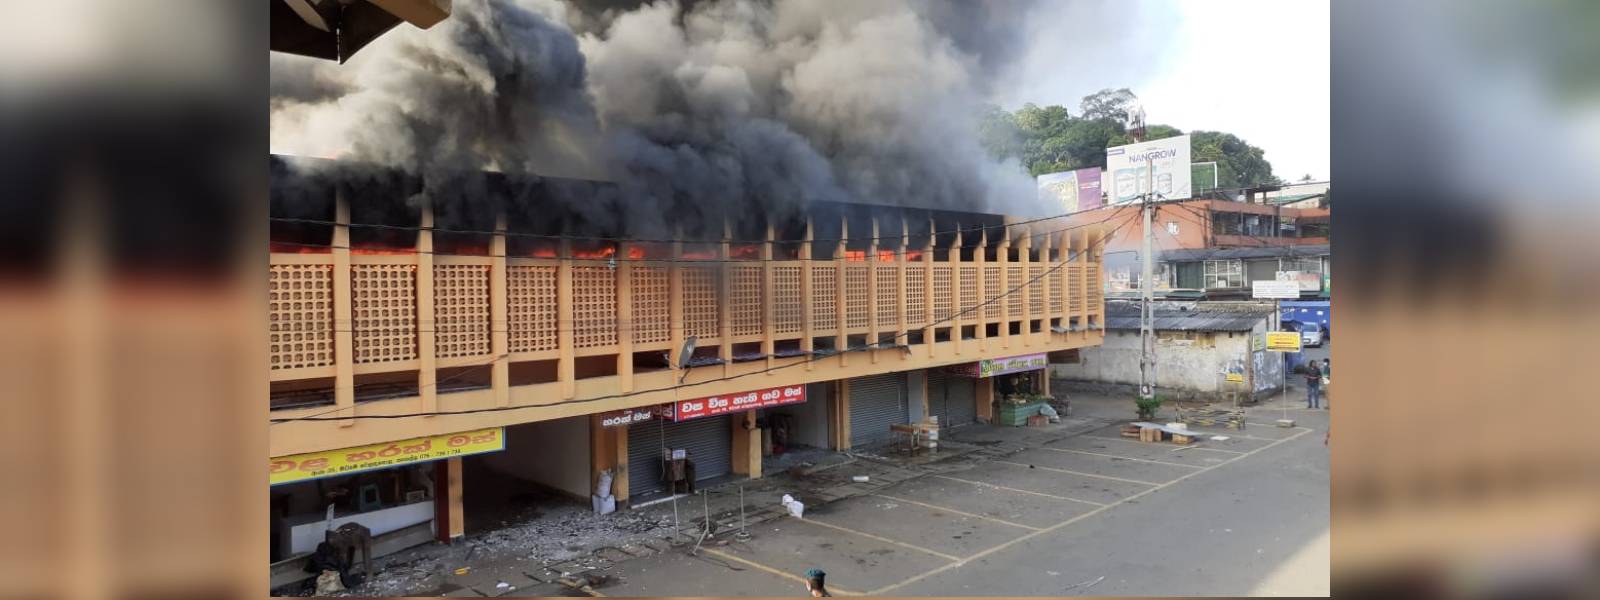 Fire erupts at Public Market building in Kegalle